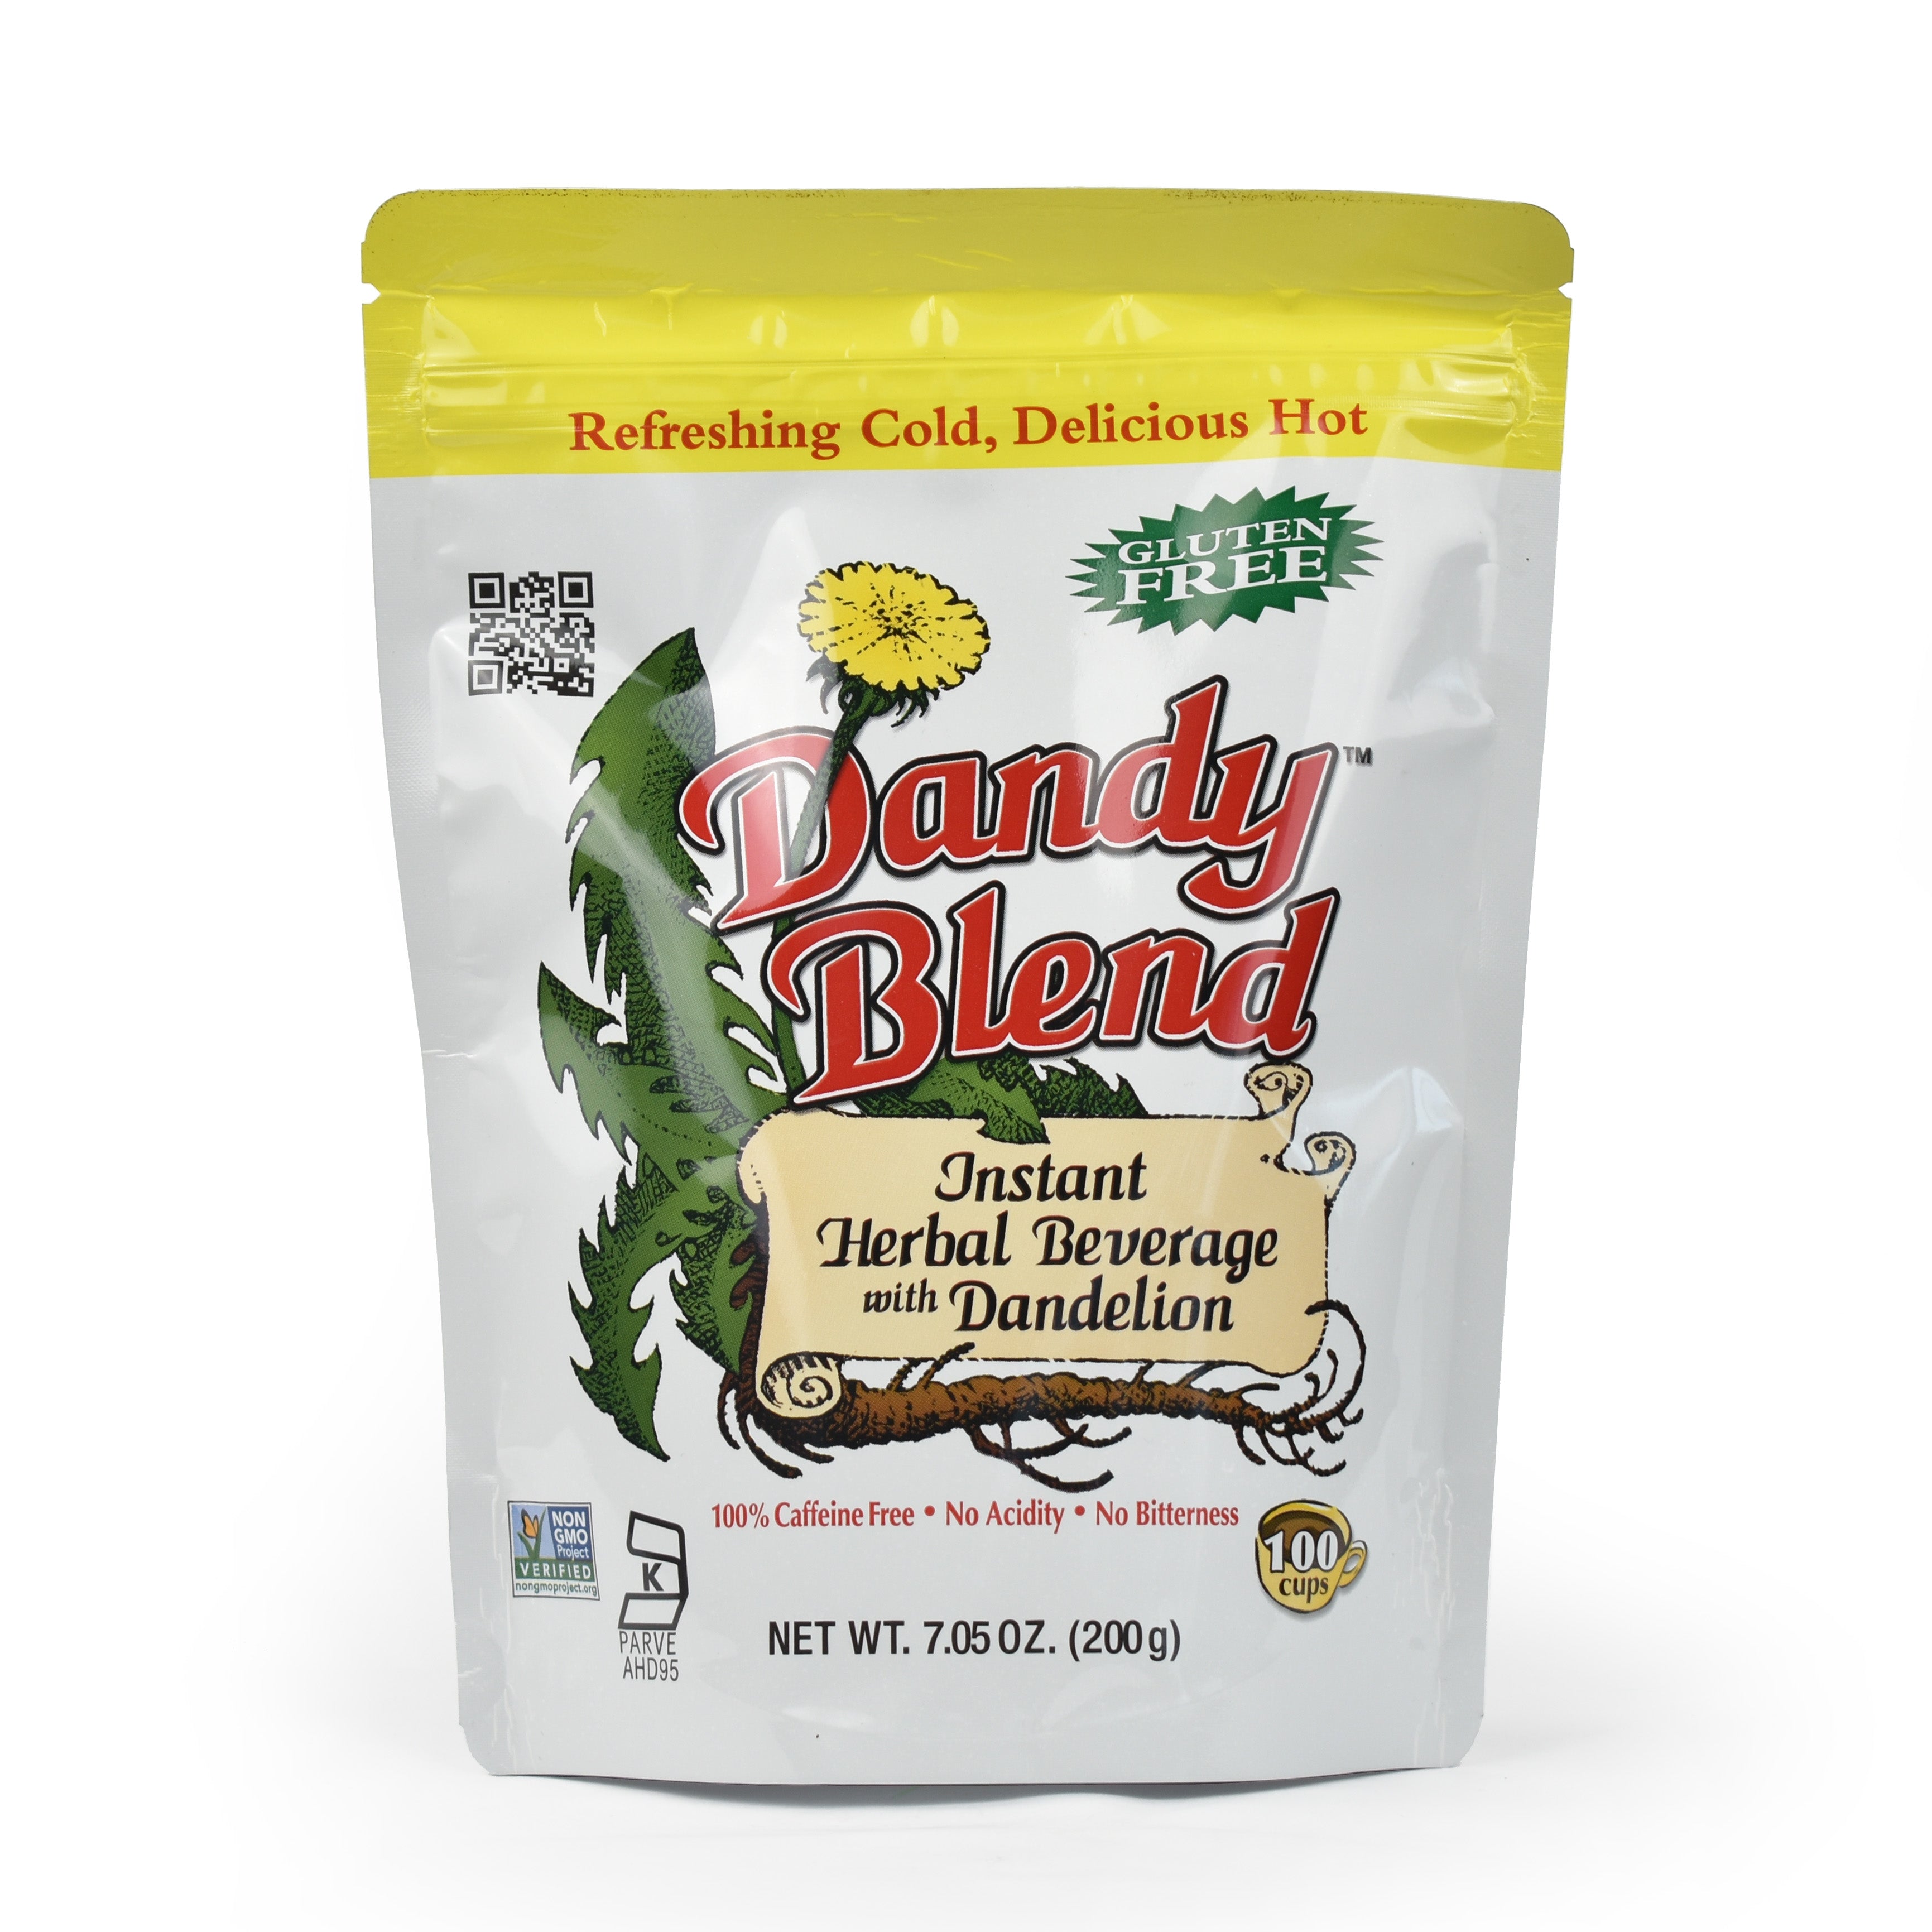 Dandy Blend - February is American Heart Month and Dandy Blend has your  heart health in mind! Read below for a couple of reasons why. Dandy Blend's  ingredients have a history of